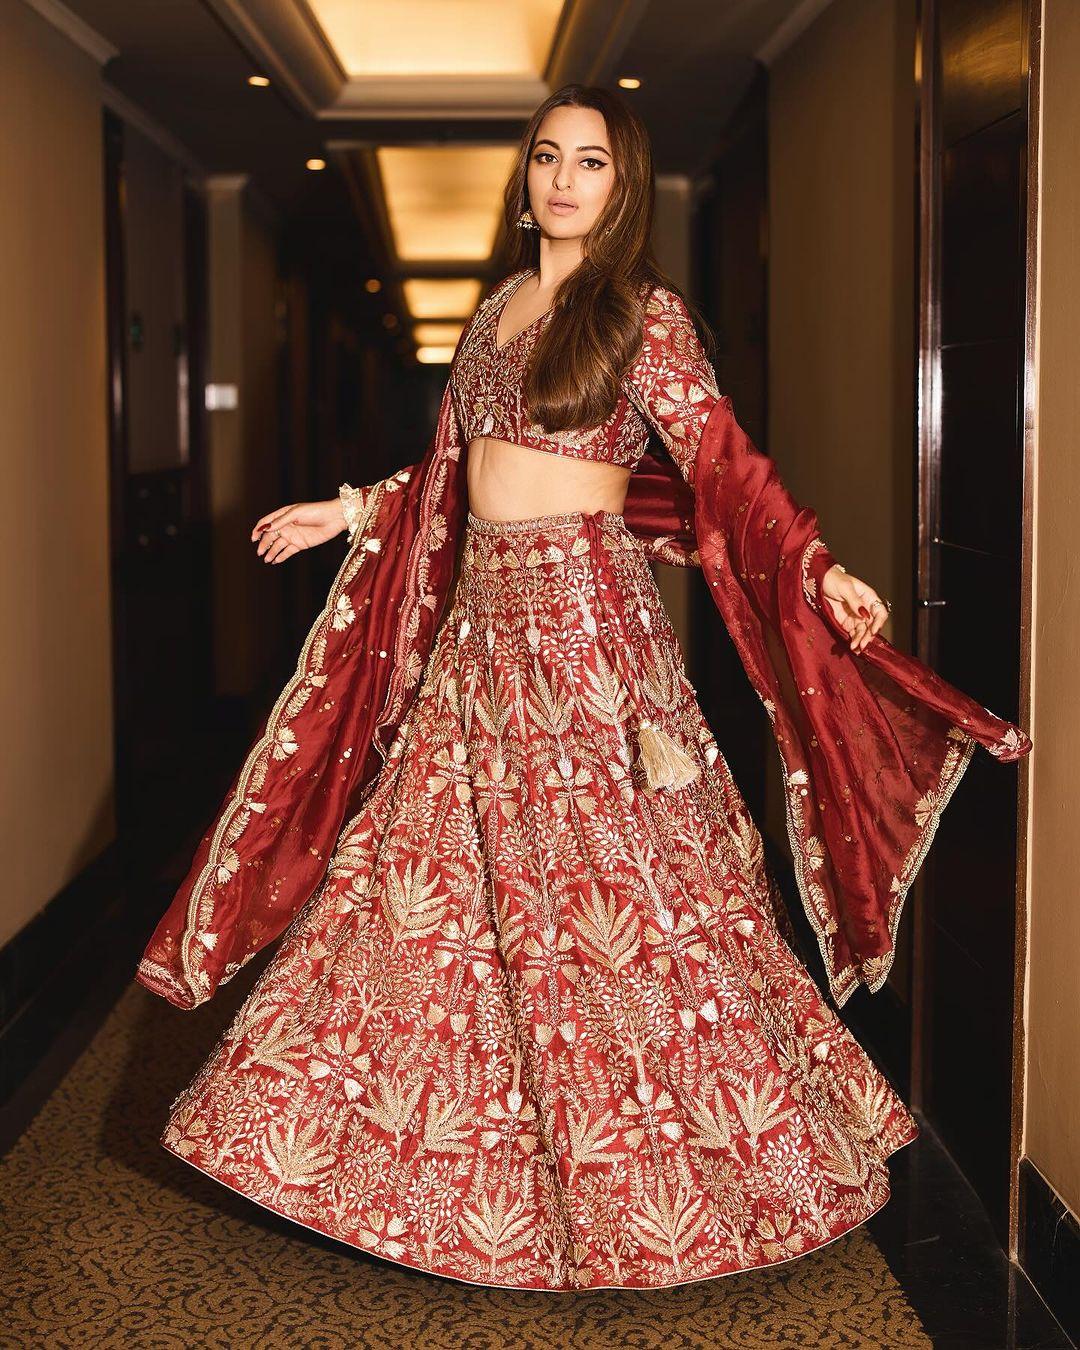 Sonakshi Sinha's red lehenga look is our personal favorite. This one will earn you a lot of praise at any Eid party